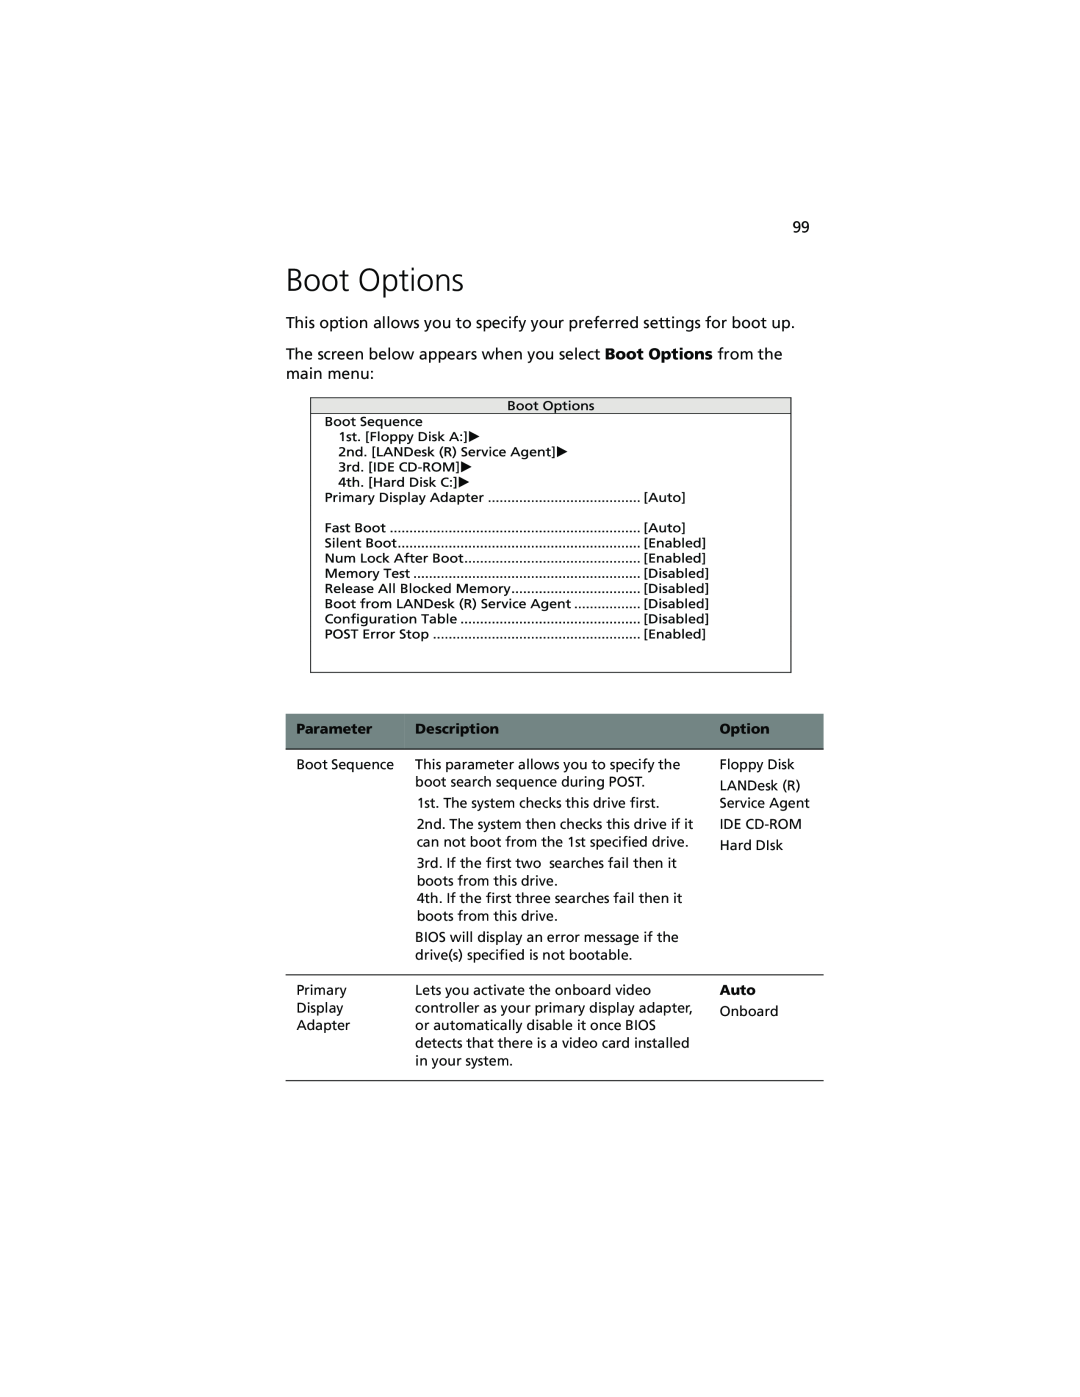 Acer Altos G610 manual Boot Options, This option allows you to specify your preferred settings for boot up 